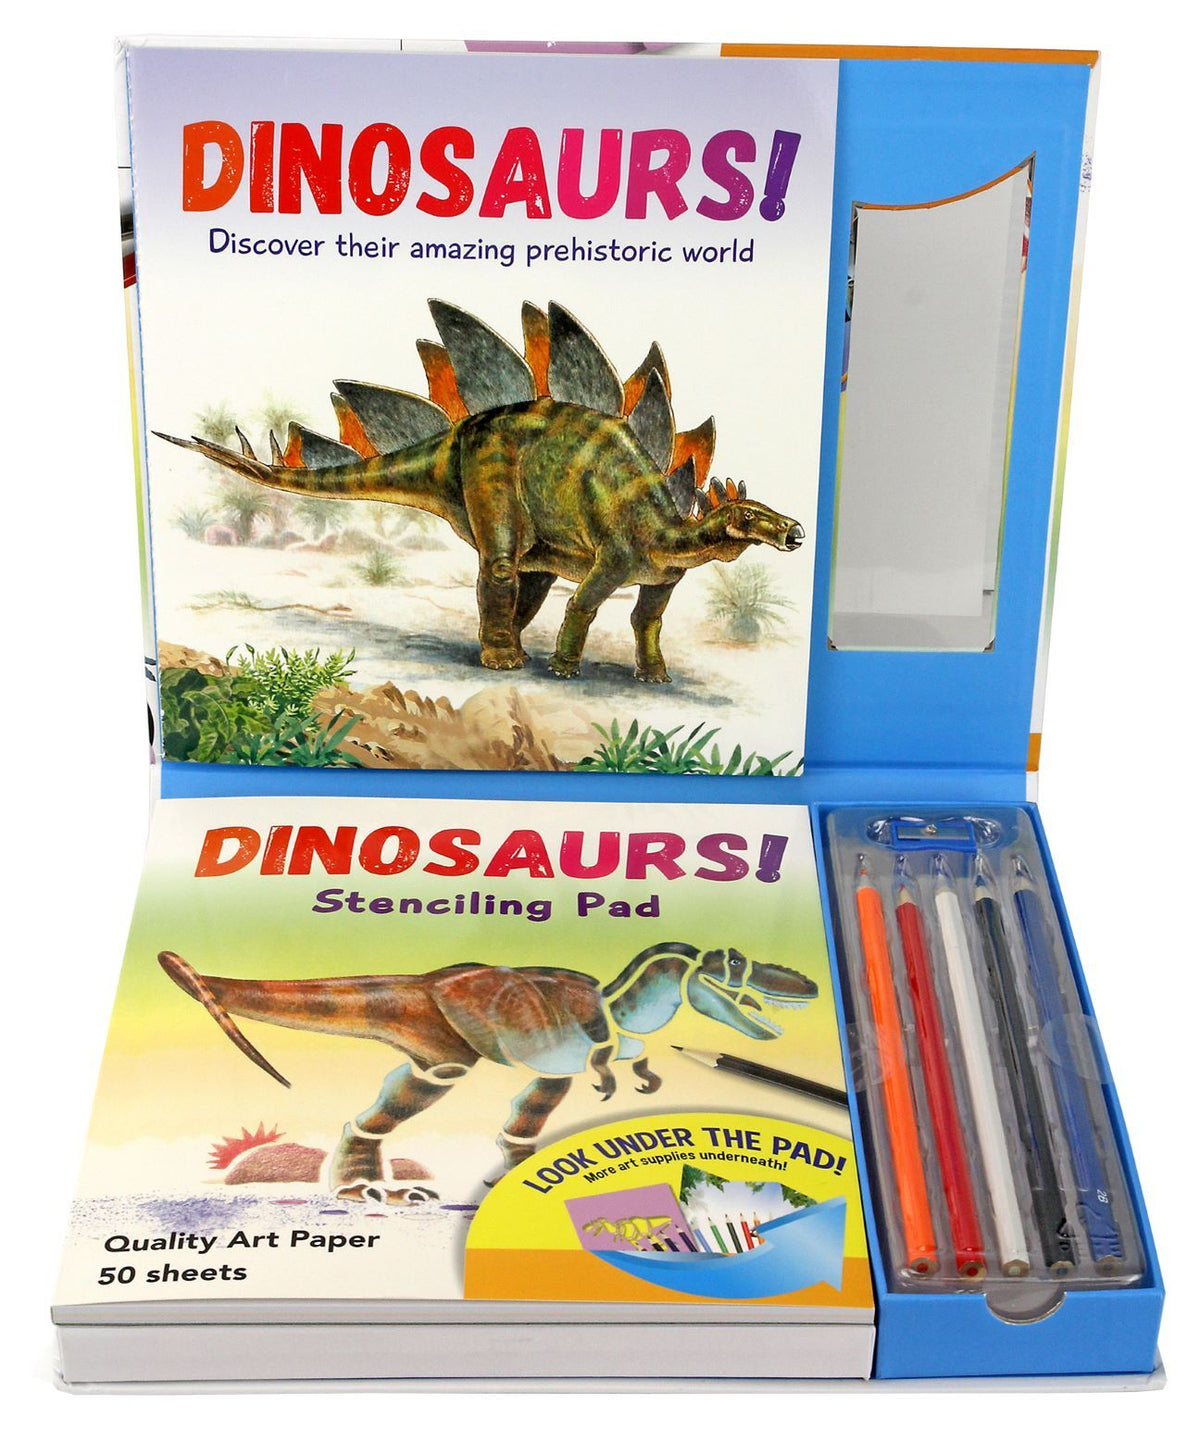 Spice Box - Learn And Draw Dinosaurs